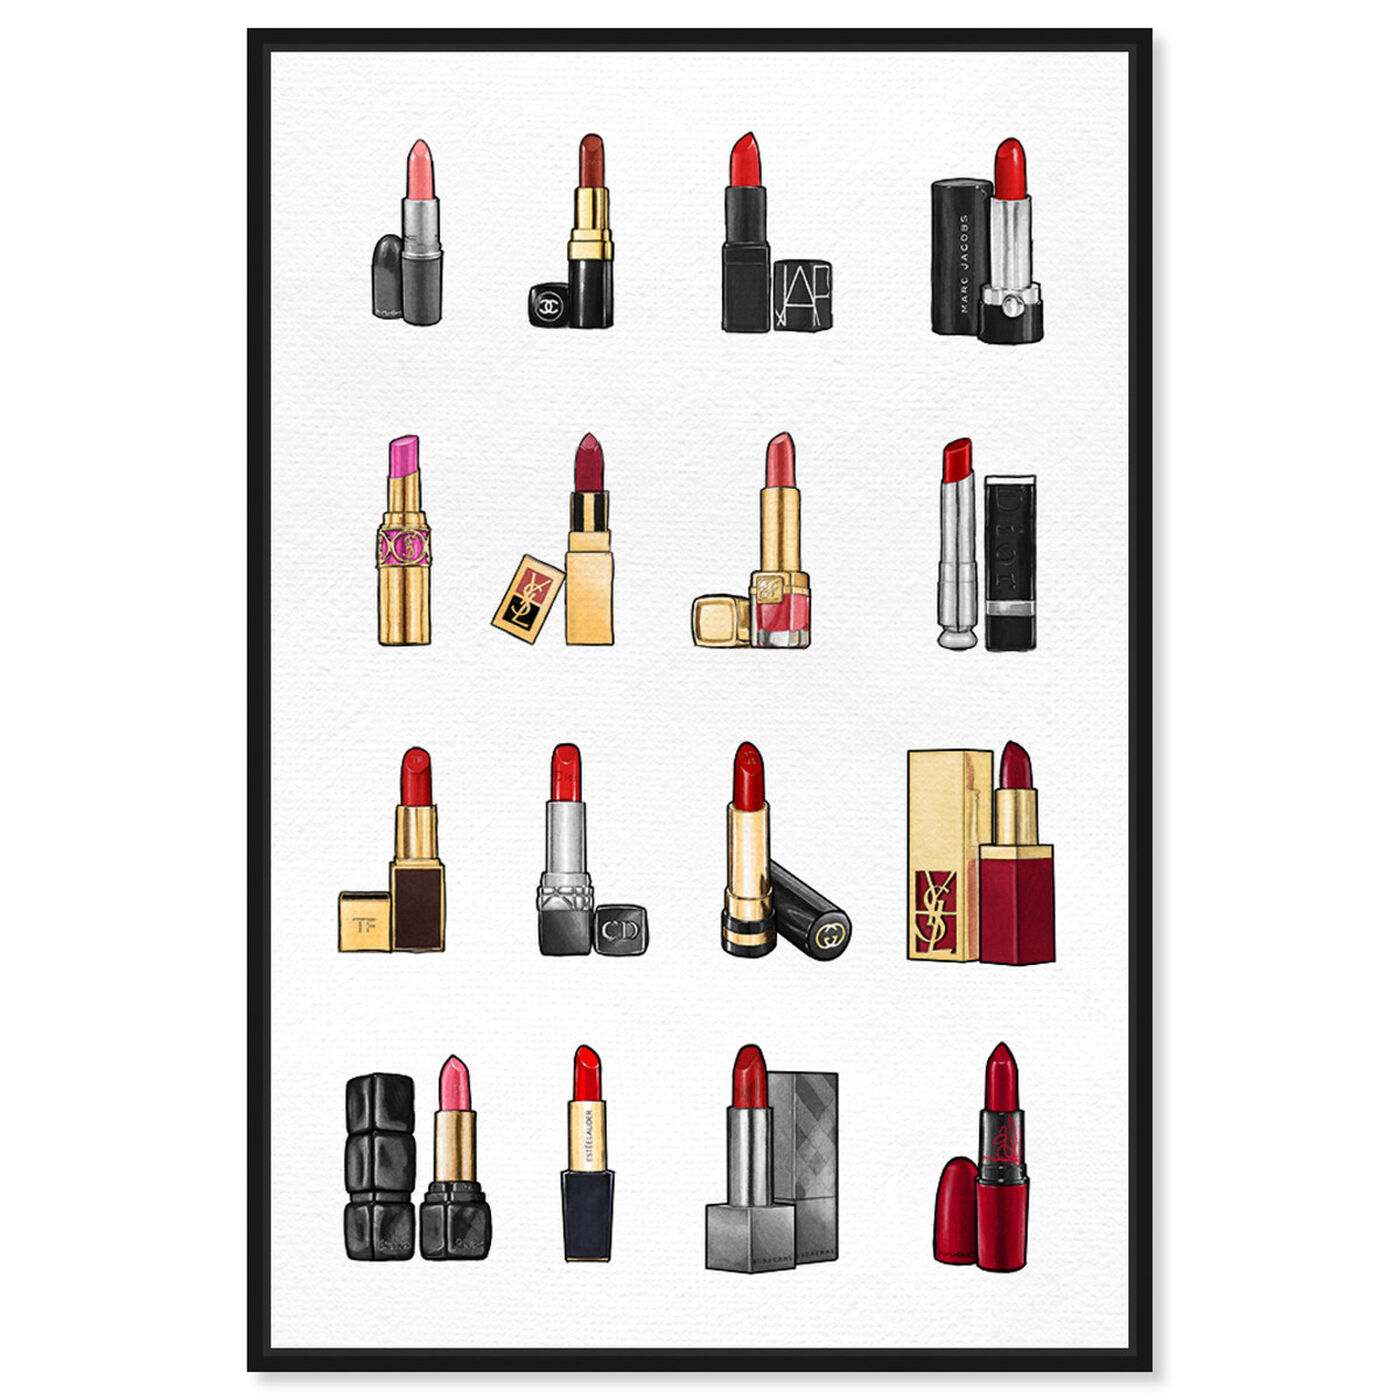 Front view of Lipsticks featuring fashion and glam and makeup art.